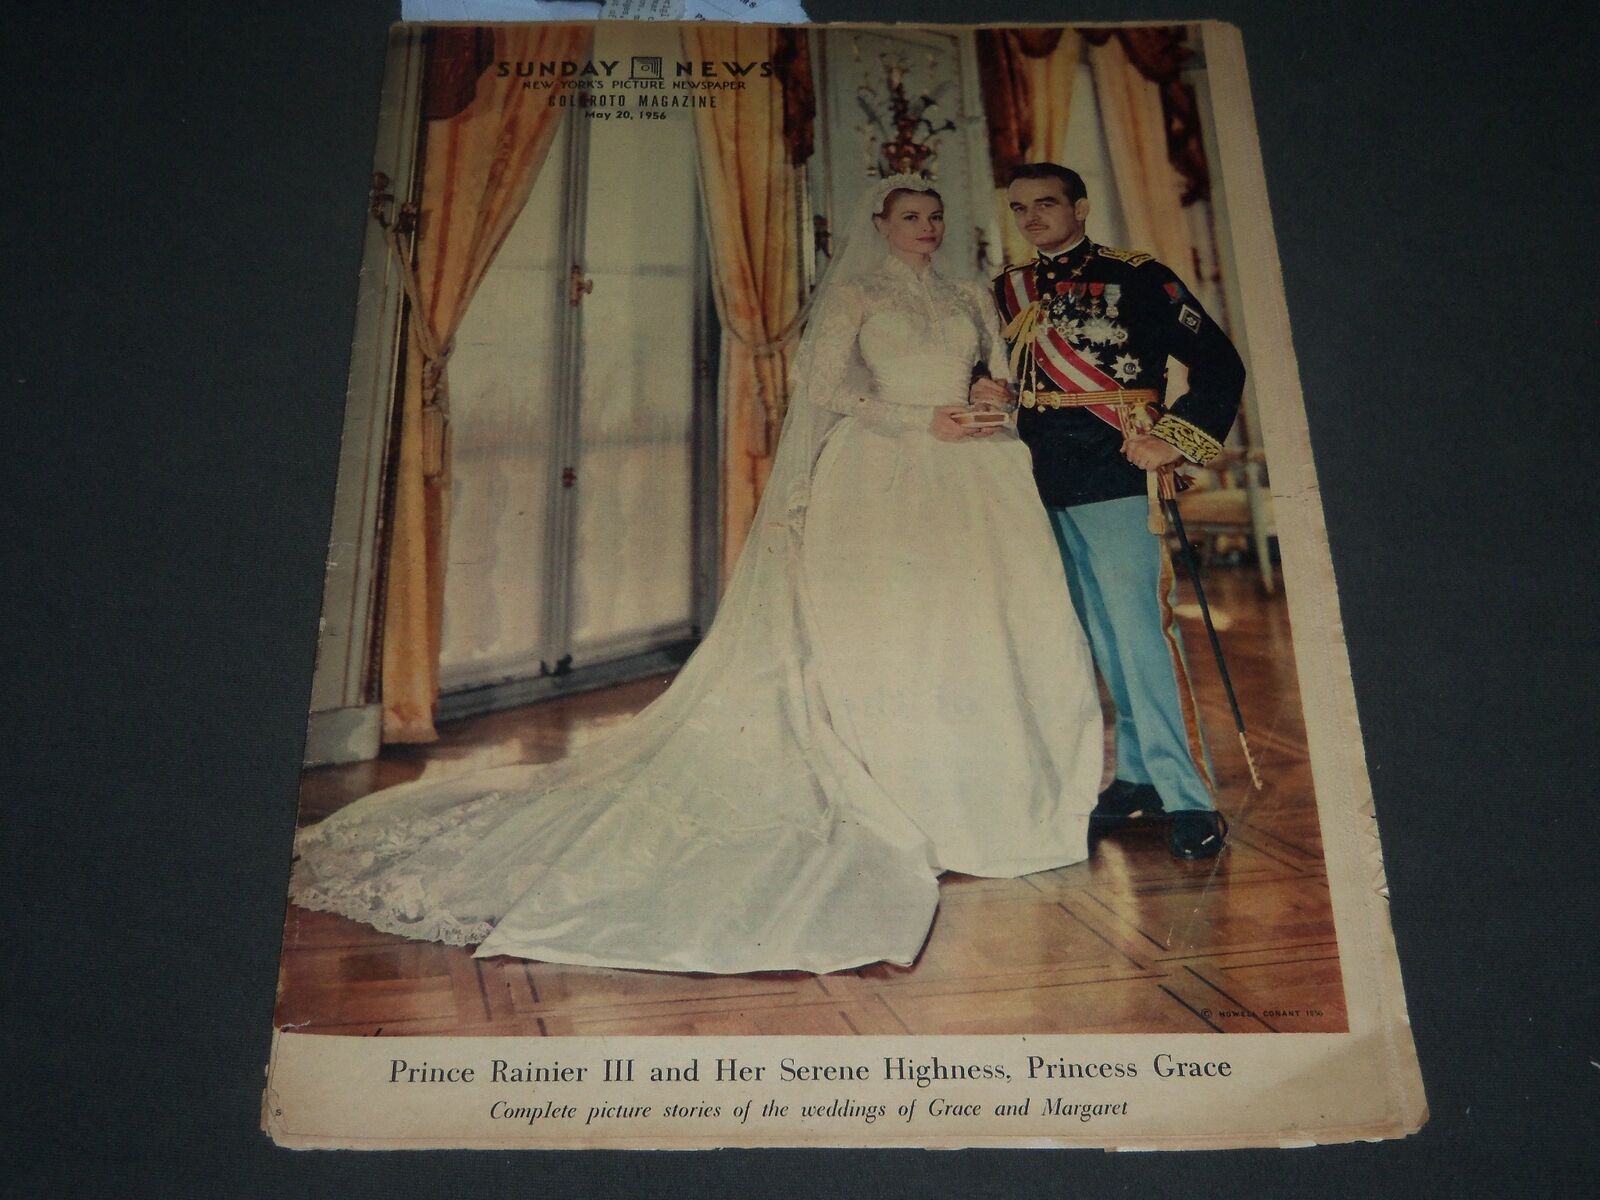 1956 MAY 20 COLORATO MAGAZINE SECTION - GRACE KELLY WEDDING - TRUMAN - NP 2419